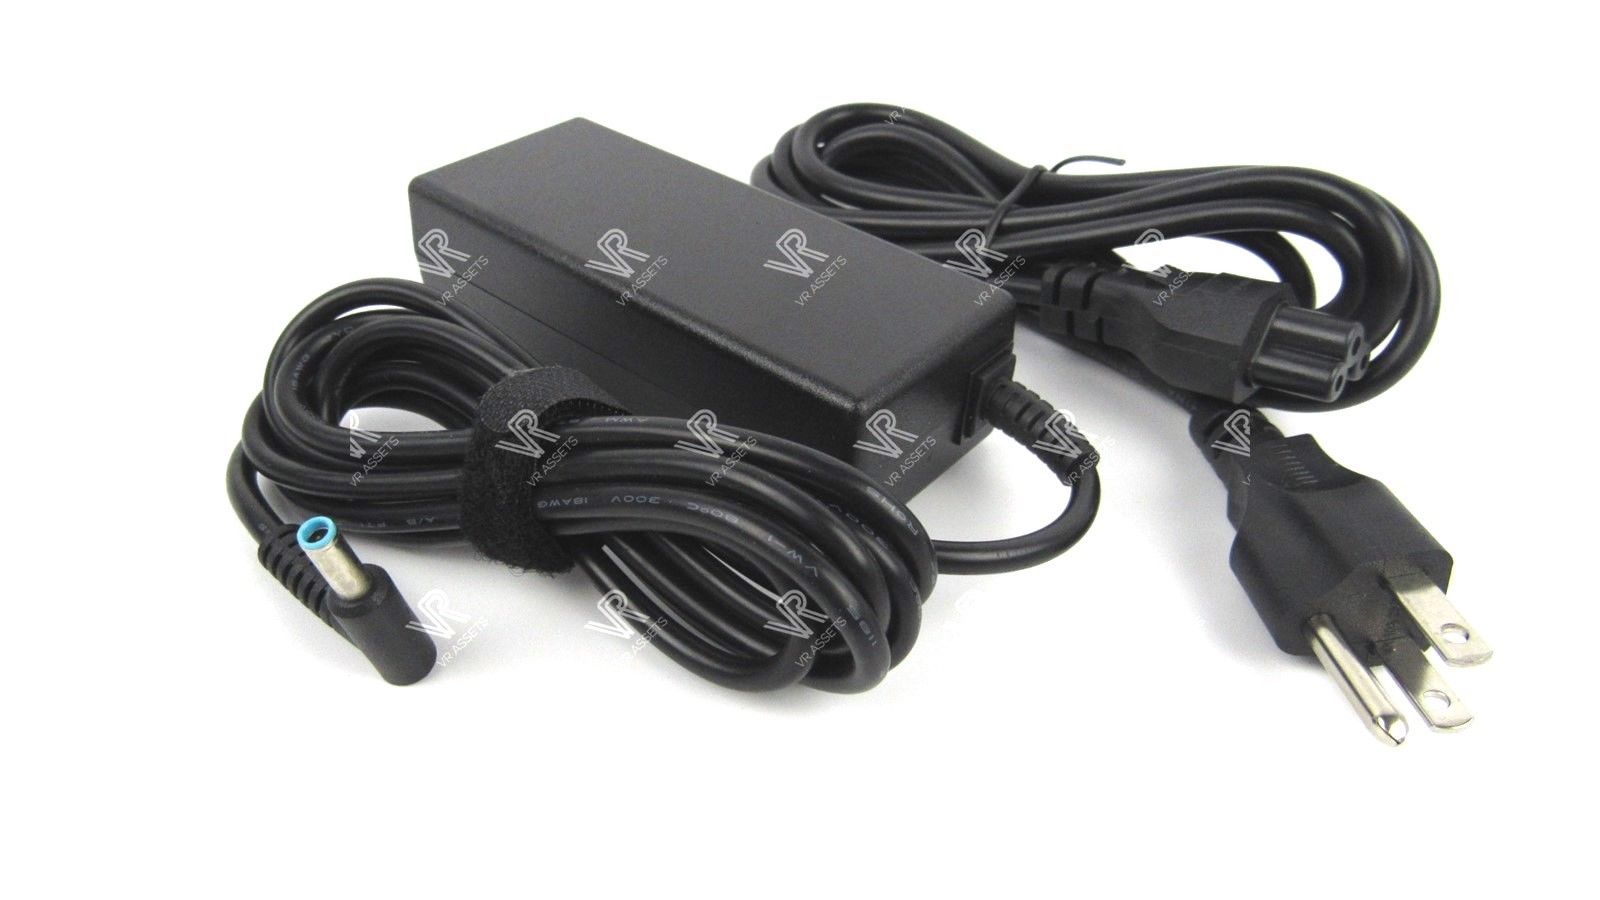 Genuine HP Laptop Power Adapter with Cord 19.5V 3.33A 65W PP009C 710412-001